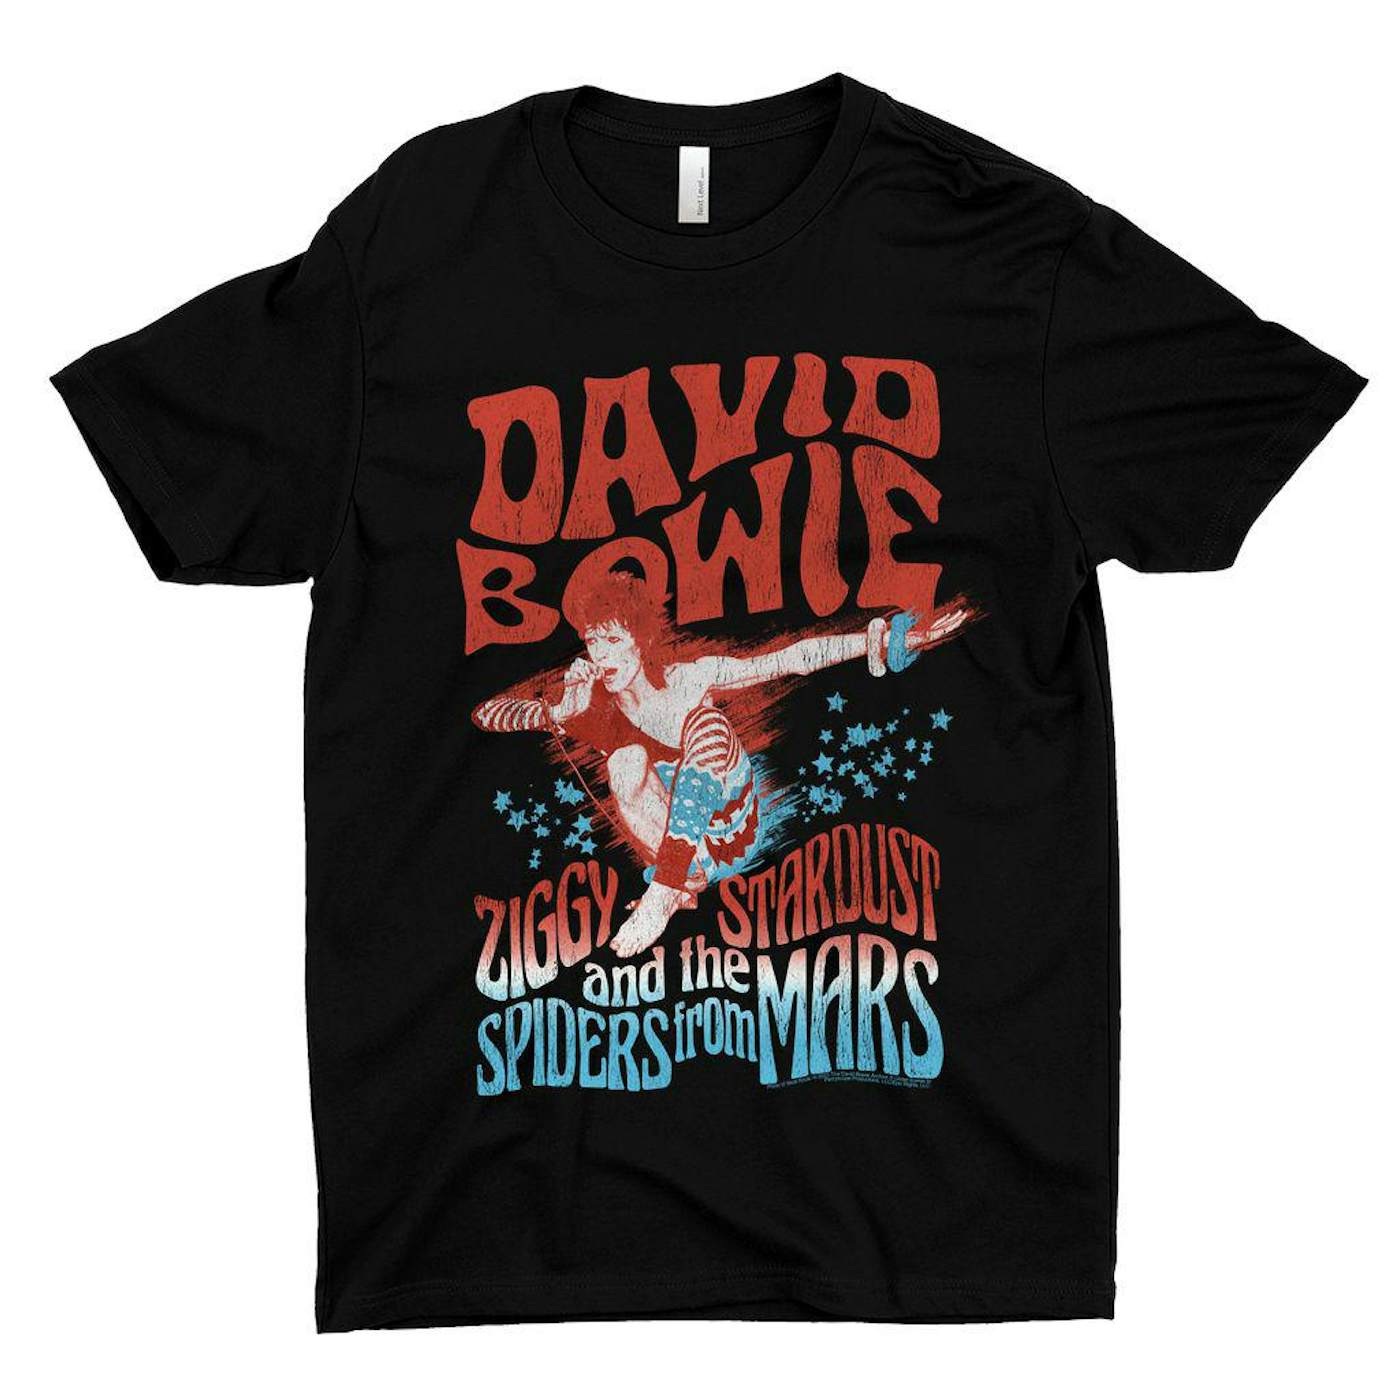 David Bowie T-Shirt | Red, White, Blue Ziggy Stardust And The Spiders From Mars (Merchbar Exclusive) David Bowie Shirt